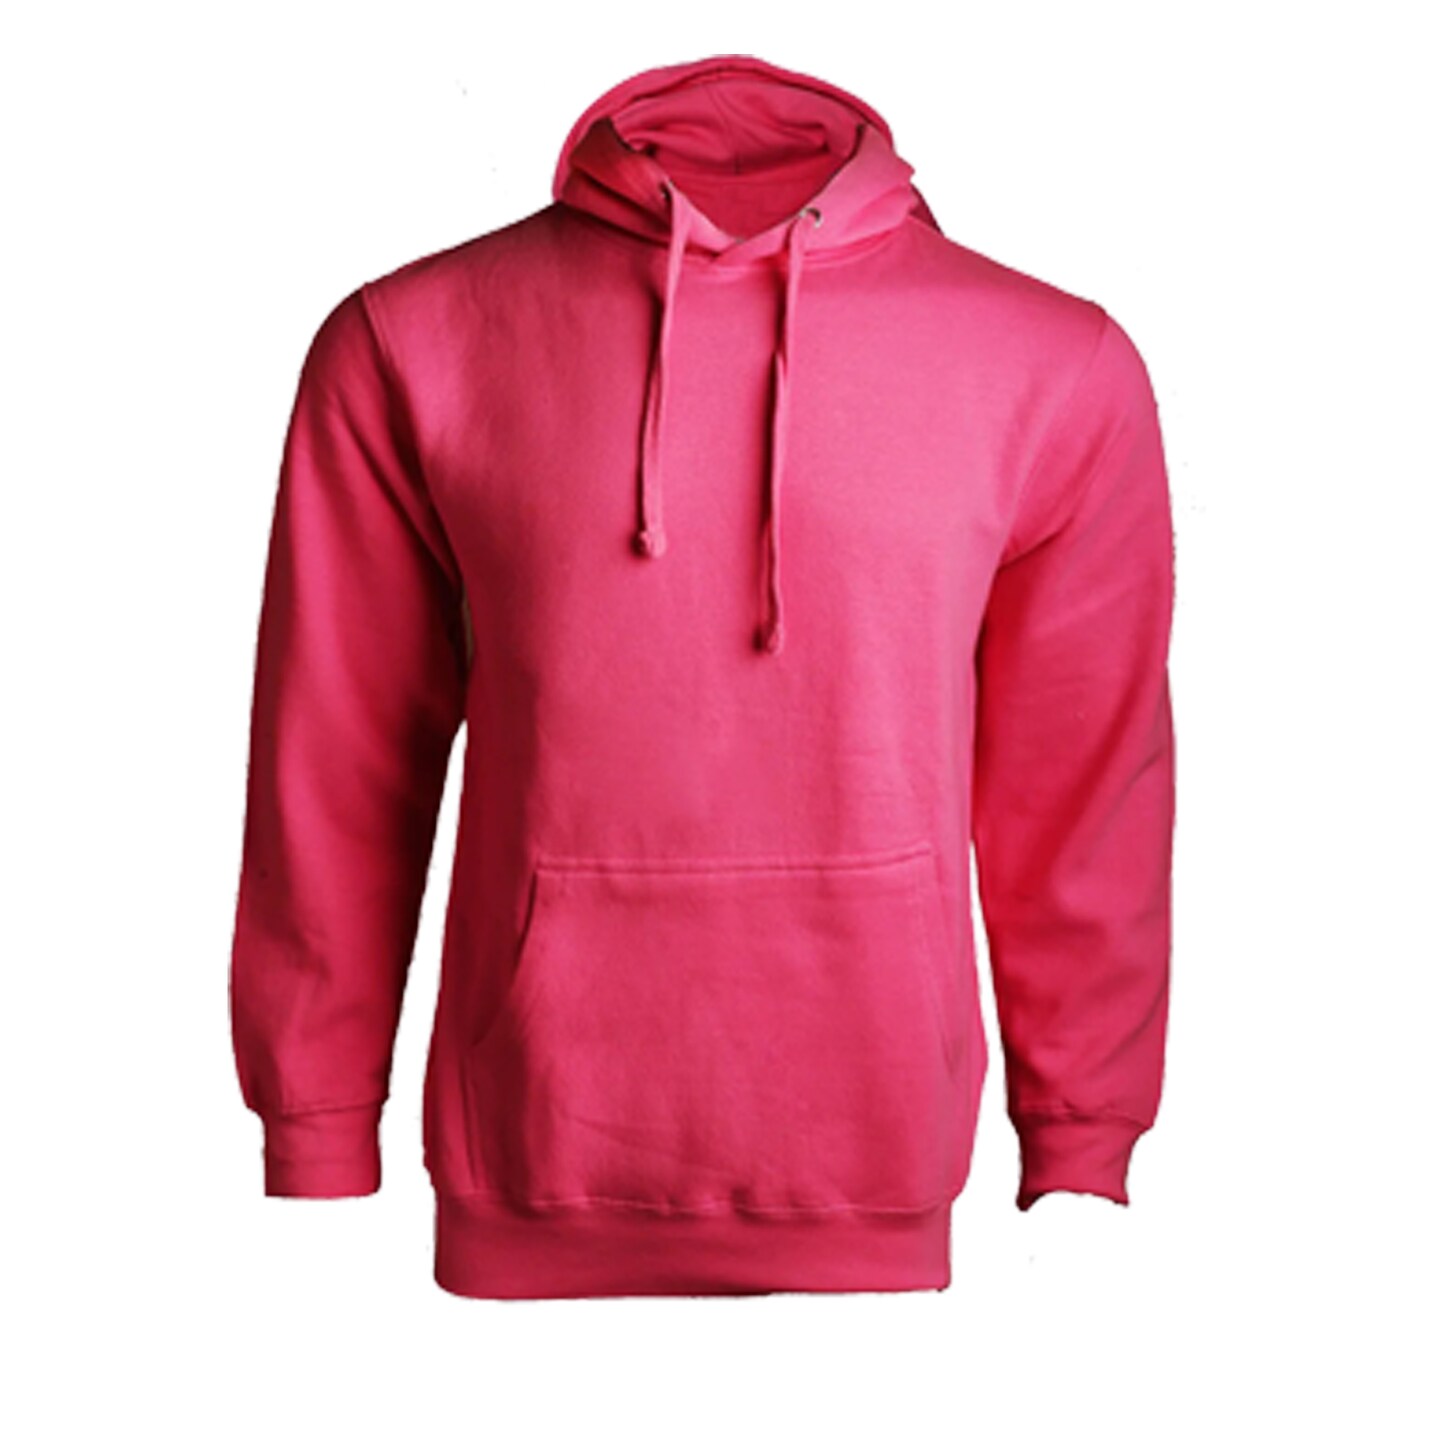 Cozy Pullover Hoodie Sweater